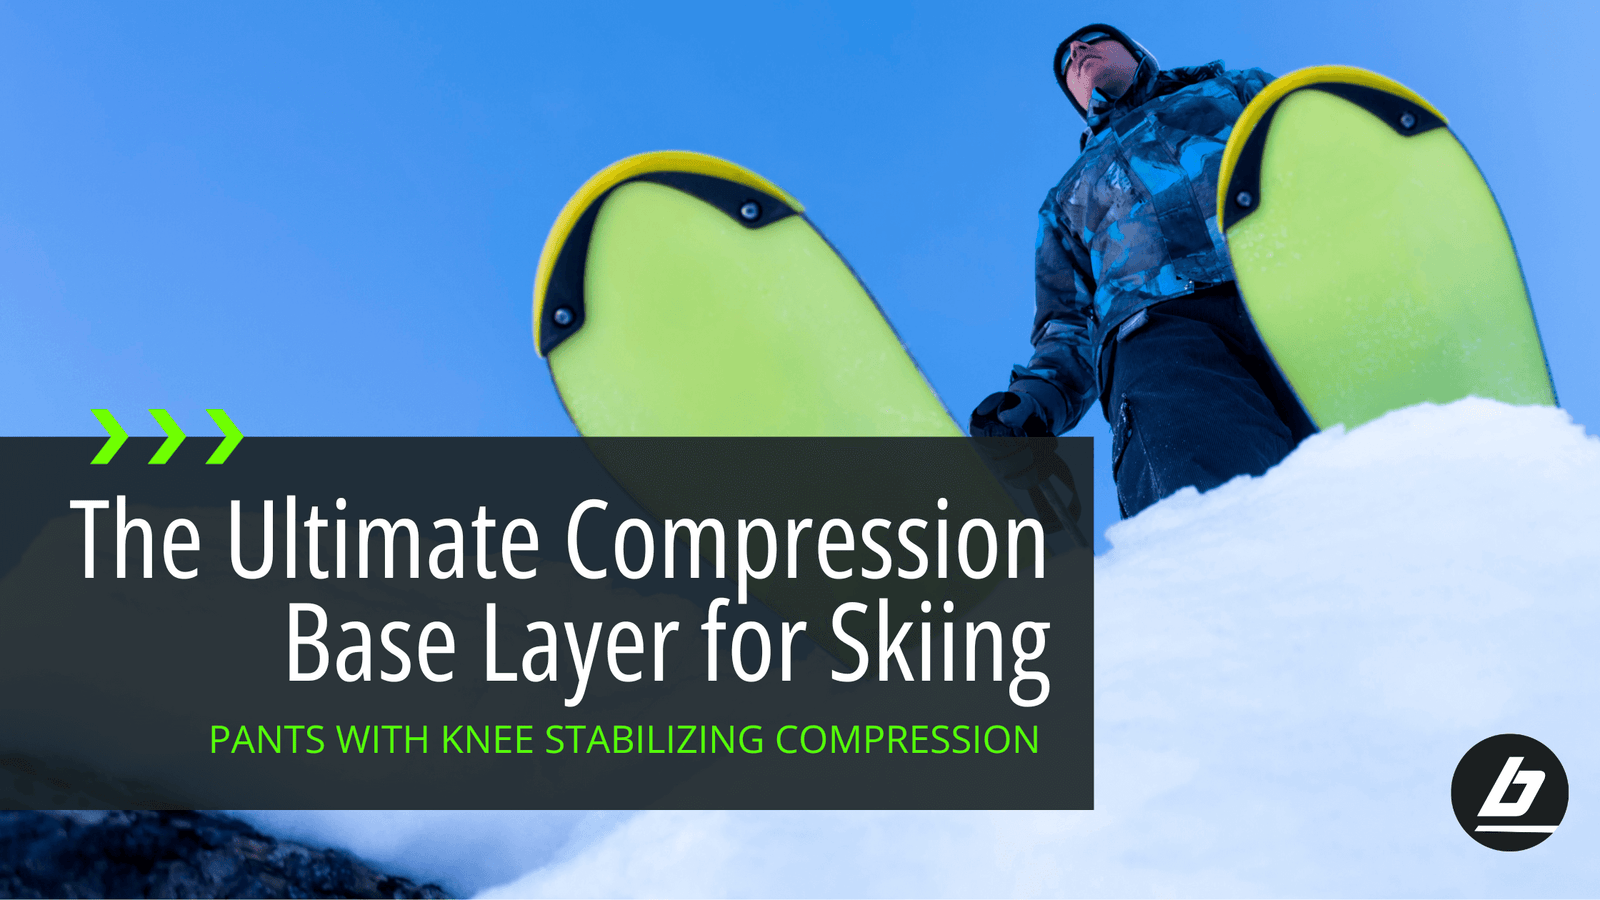 The Ultimate Compression Base Layer for Skiing, graphic by Bracelayer. Base layer for skiing, thermal base layer for skiing, skiing base layer, skiing knee support, ski injury to knee, ski knee injury, the best knee support for skiing, knee support for sk